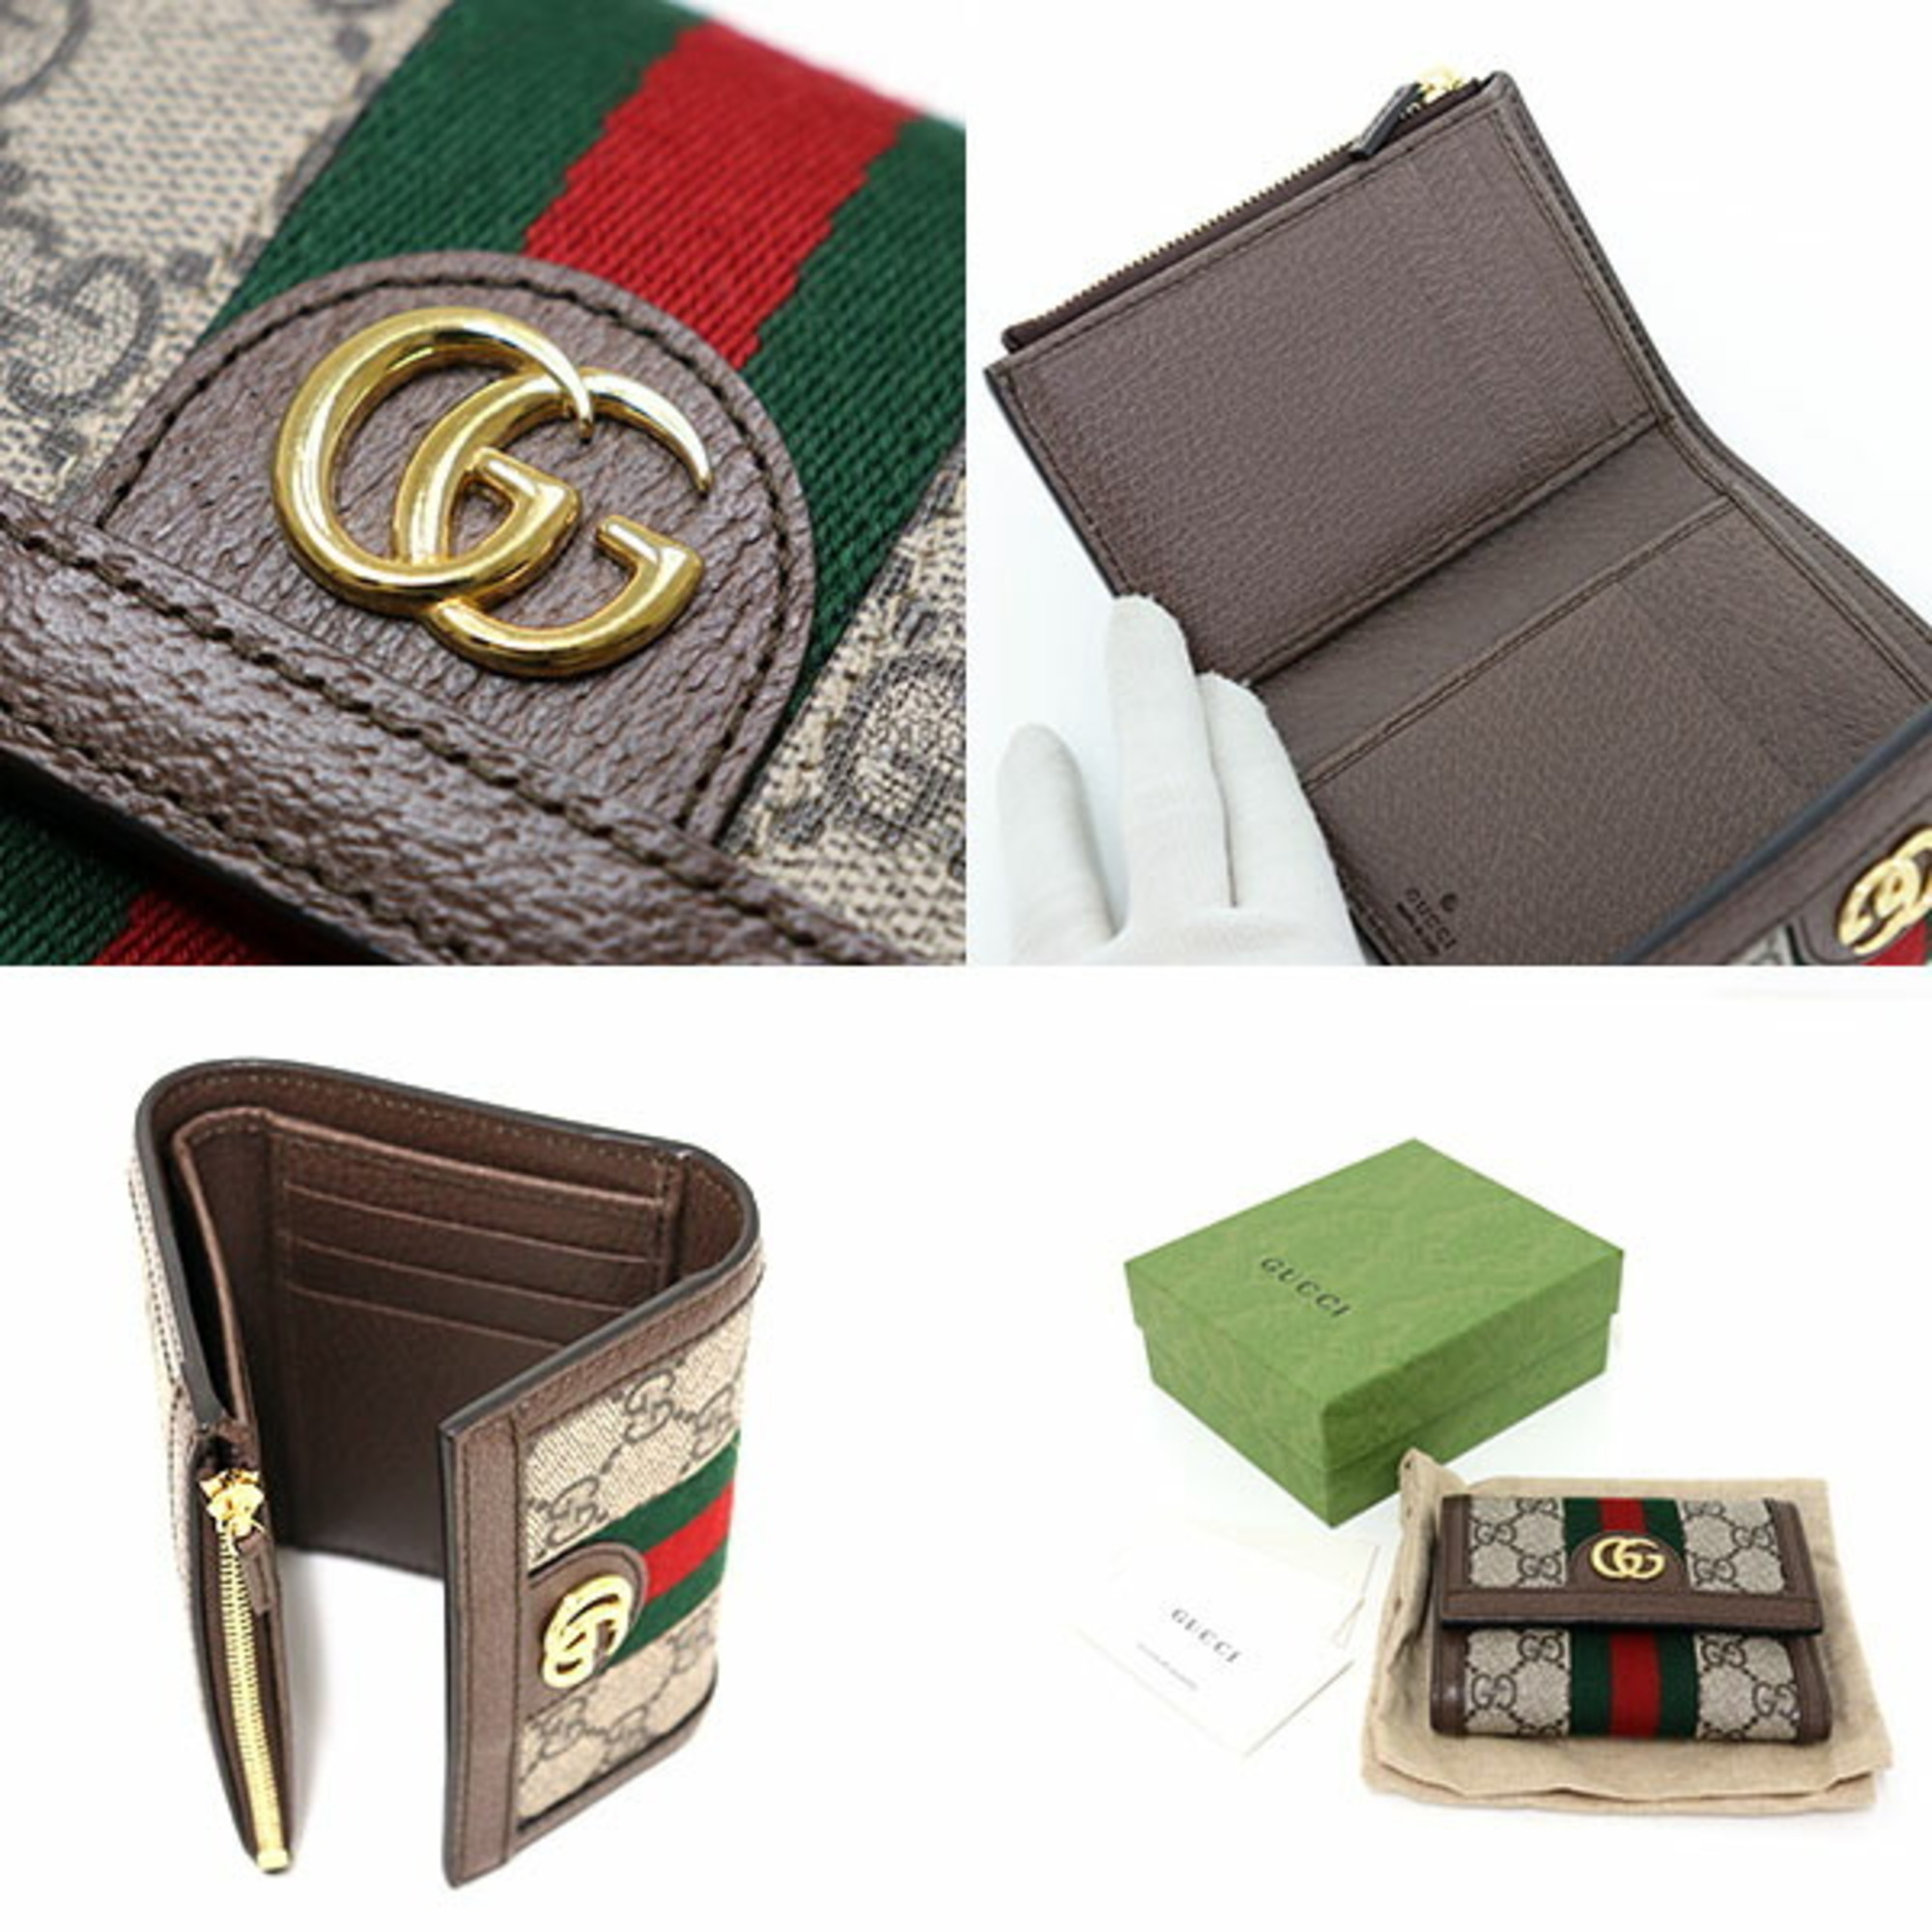 Gucci Ophidia GG Supreme Web Stripe Double G Trifold Wallet